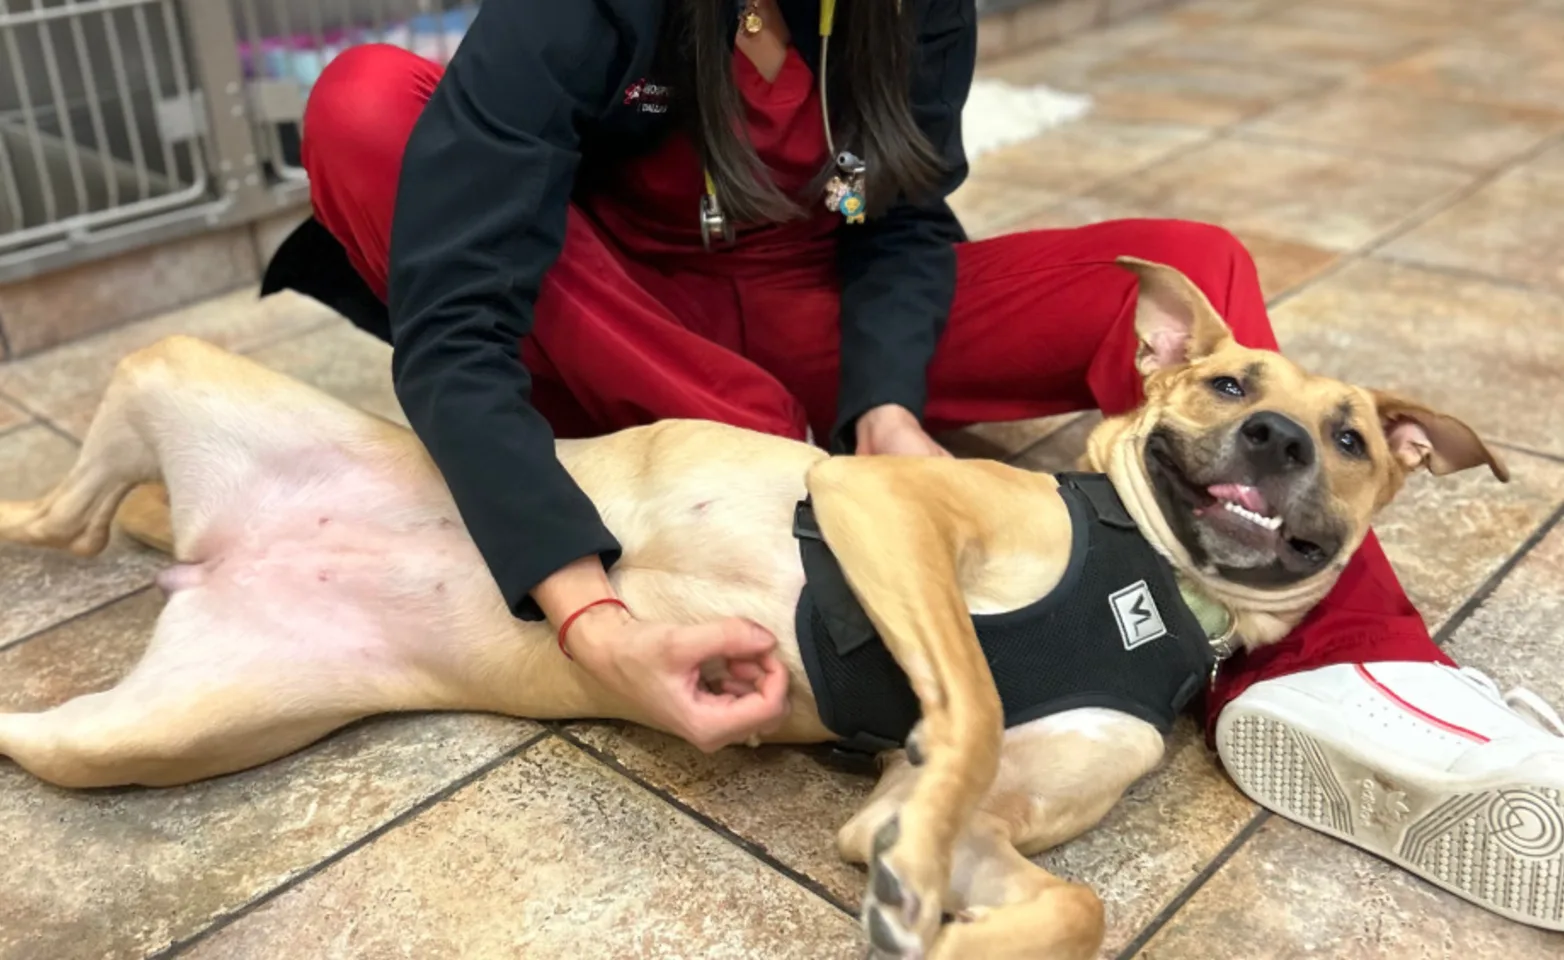 Female staff member dressed in red loving on a dog laying on the floor